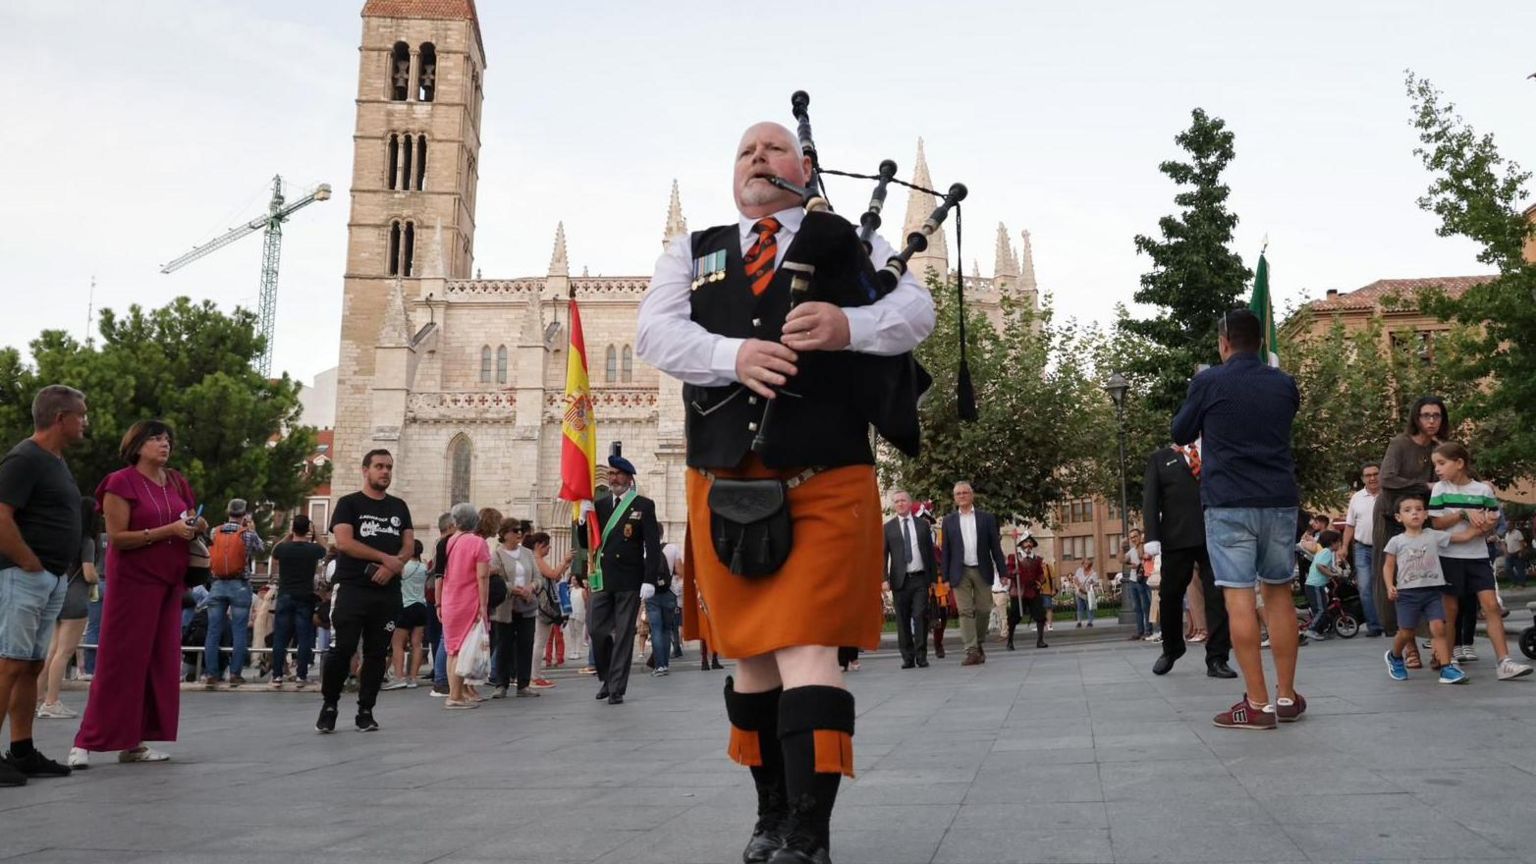 A piper joined the cortege to pay tribute to Red Hugh